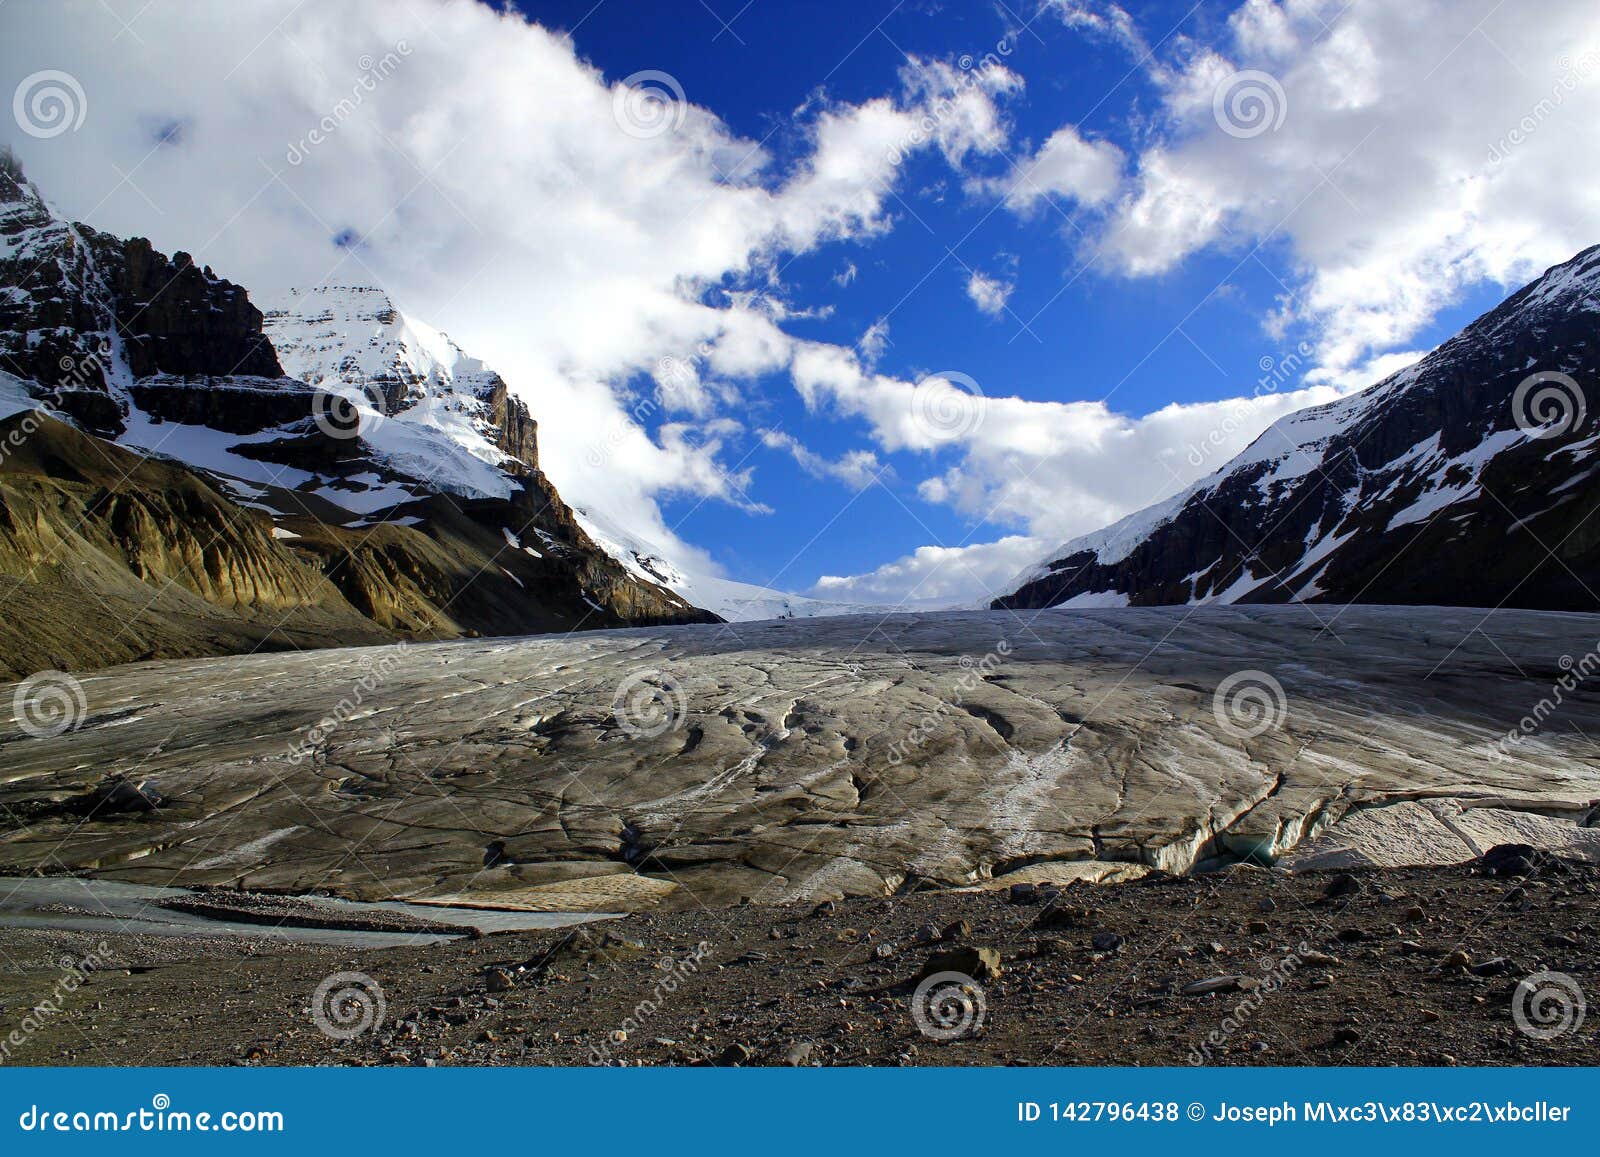 the famous athabasca galcier / columbia icefield in alberta / british columbia - canada